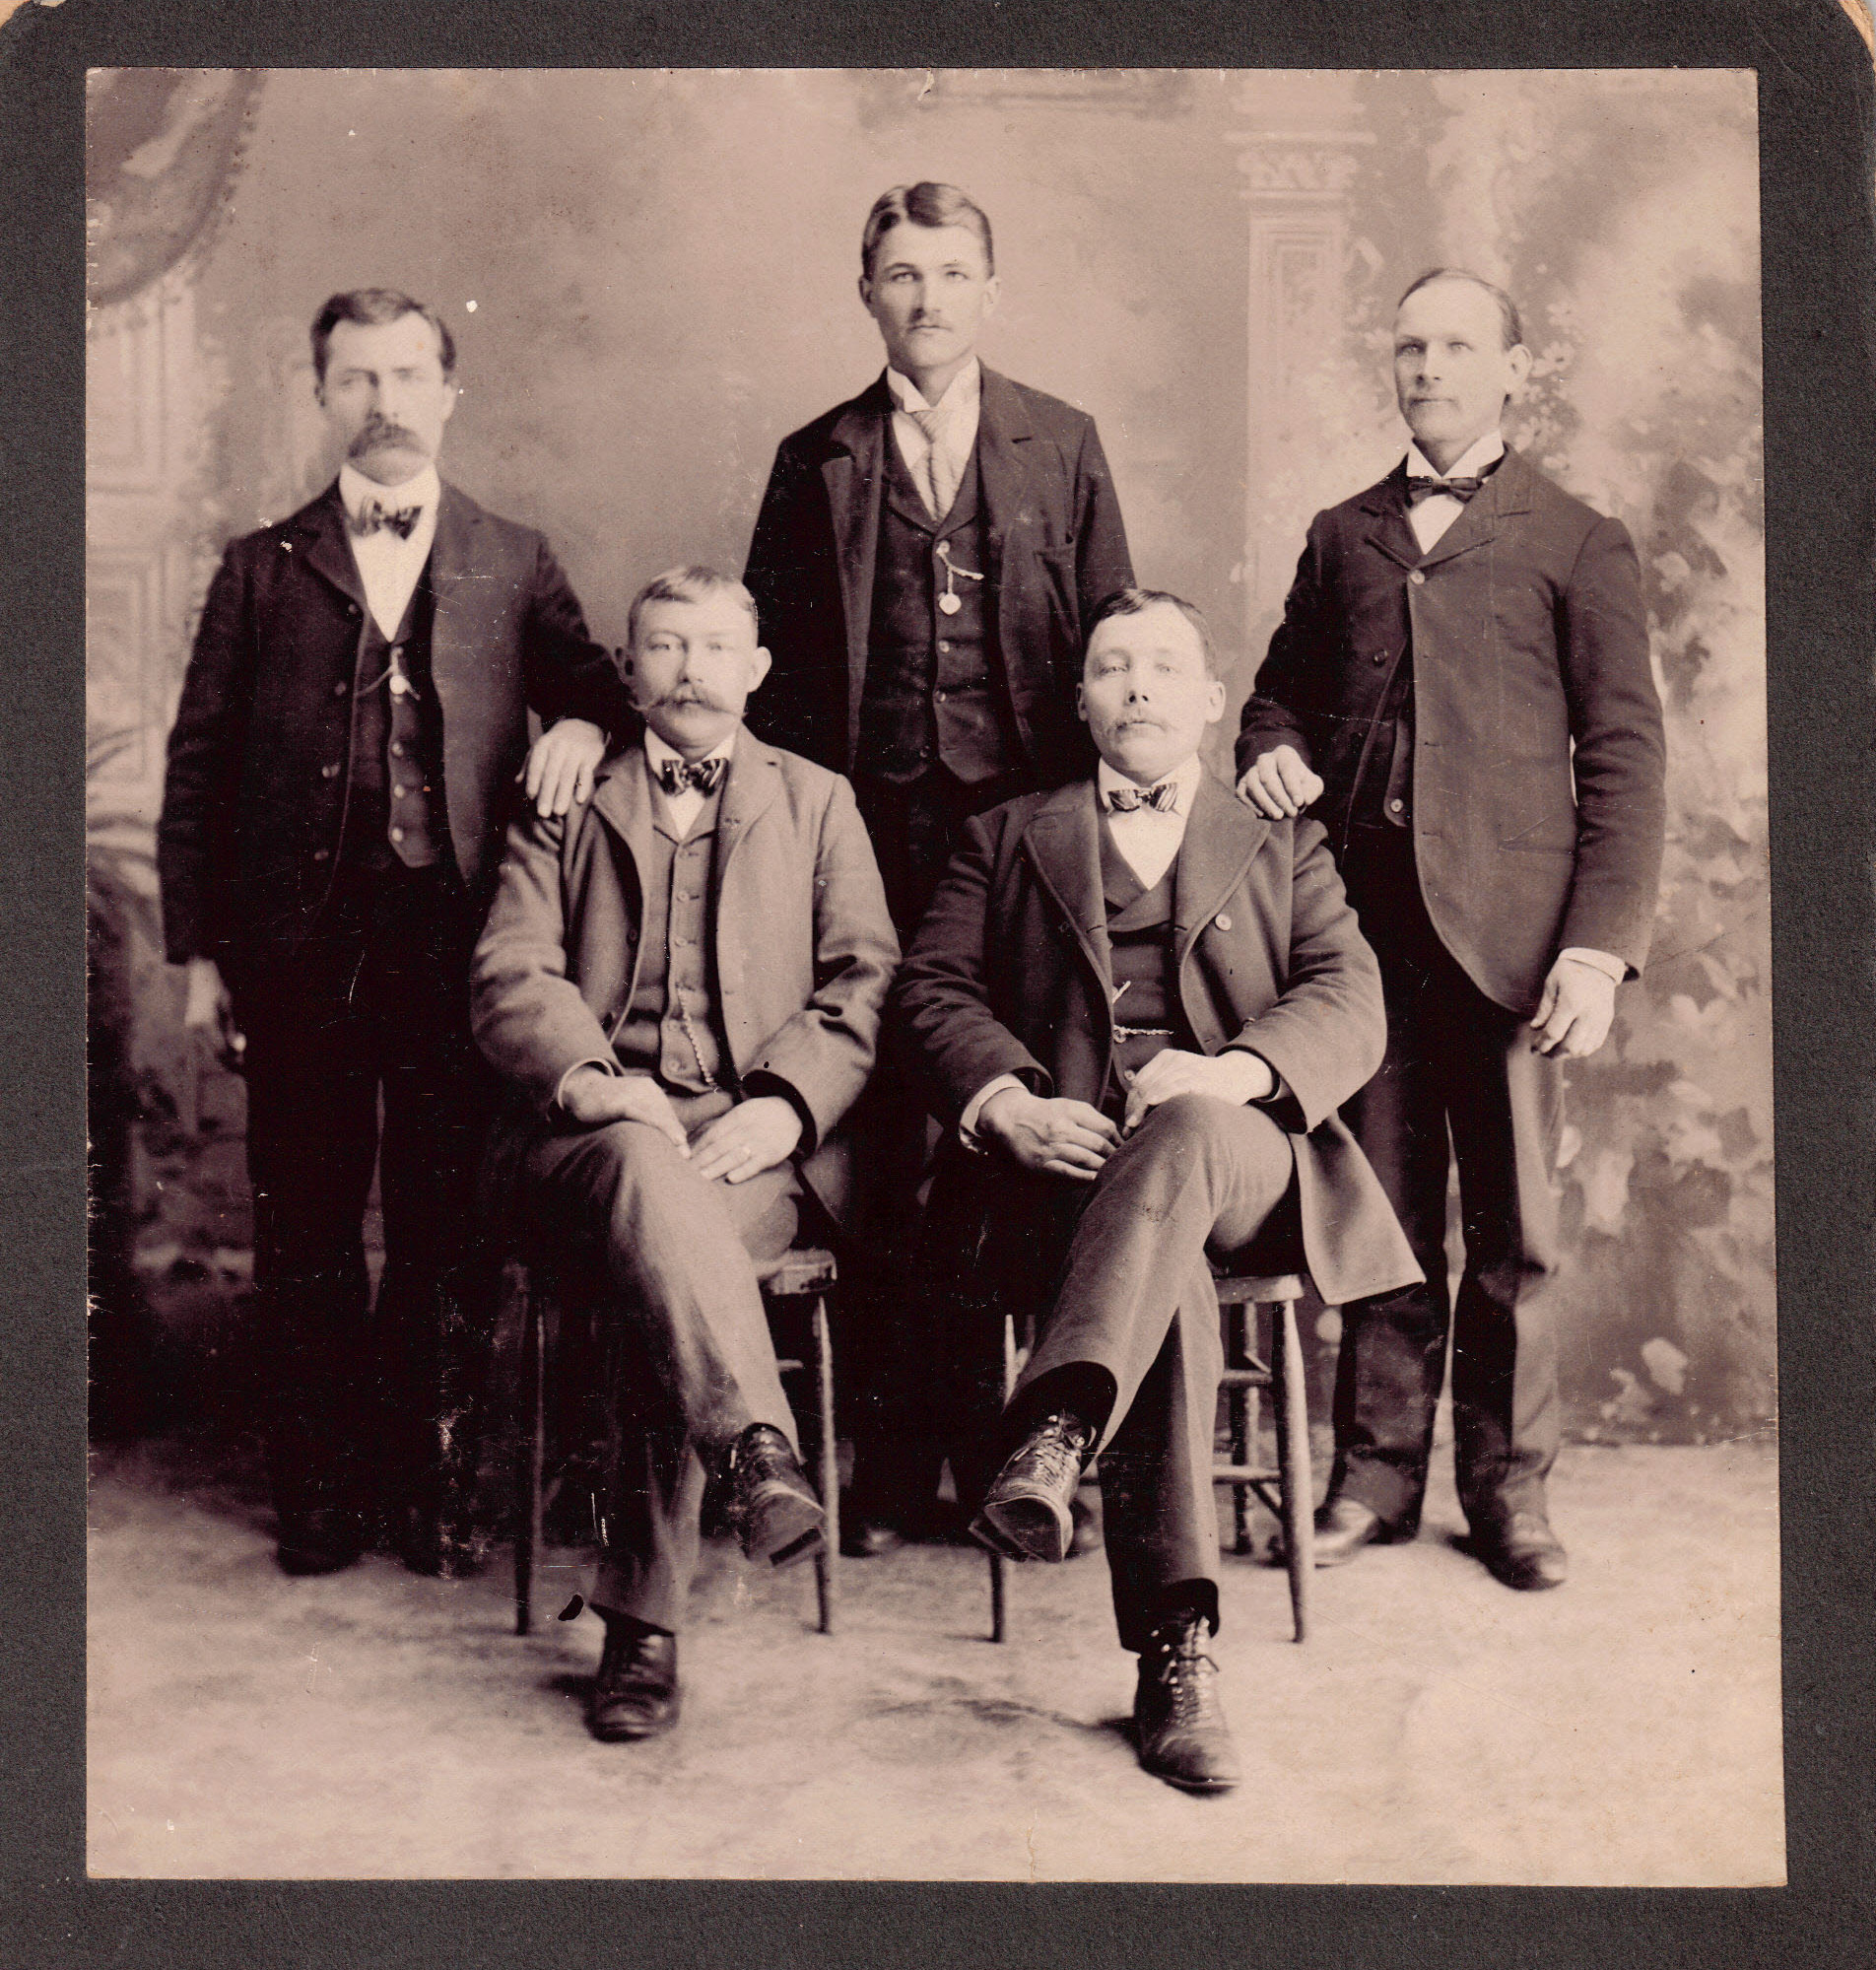 Lars Johnson (seated, right) and unknown friends